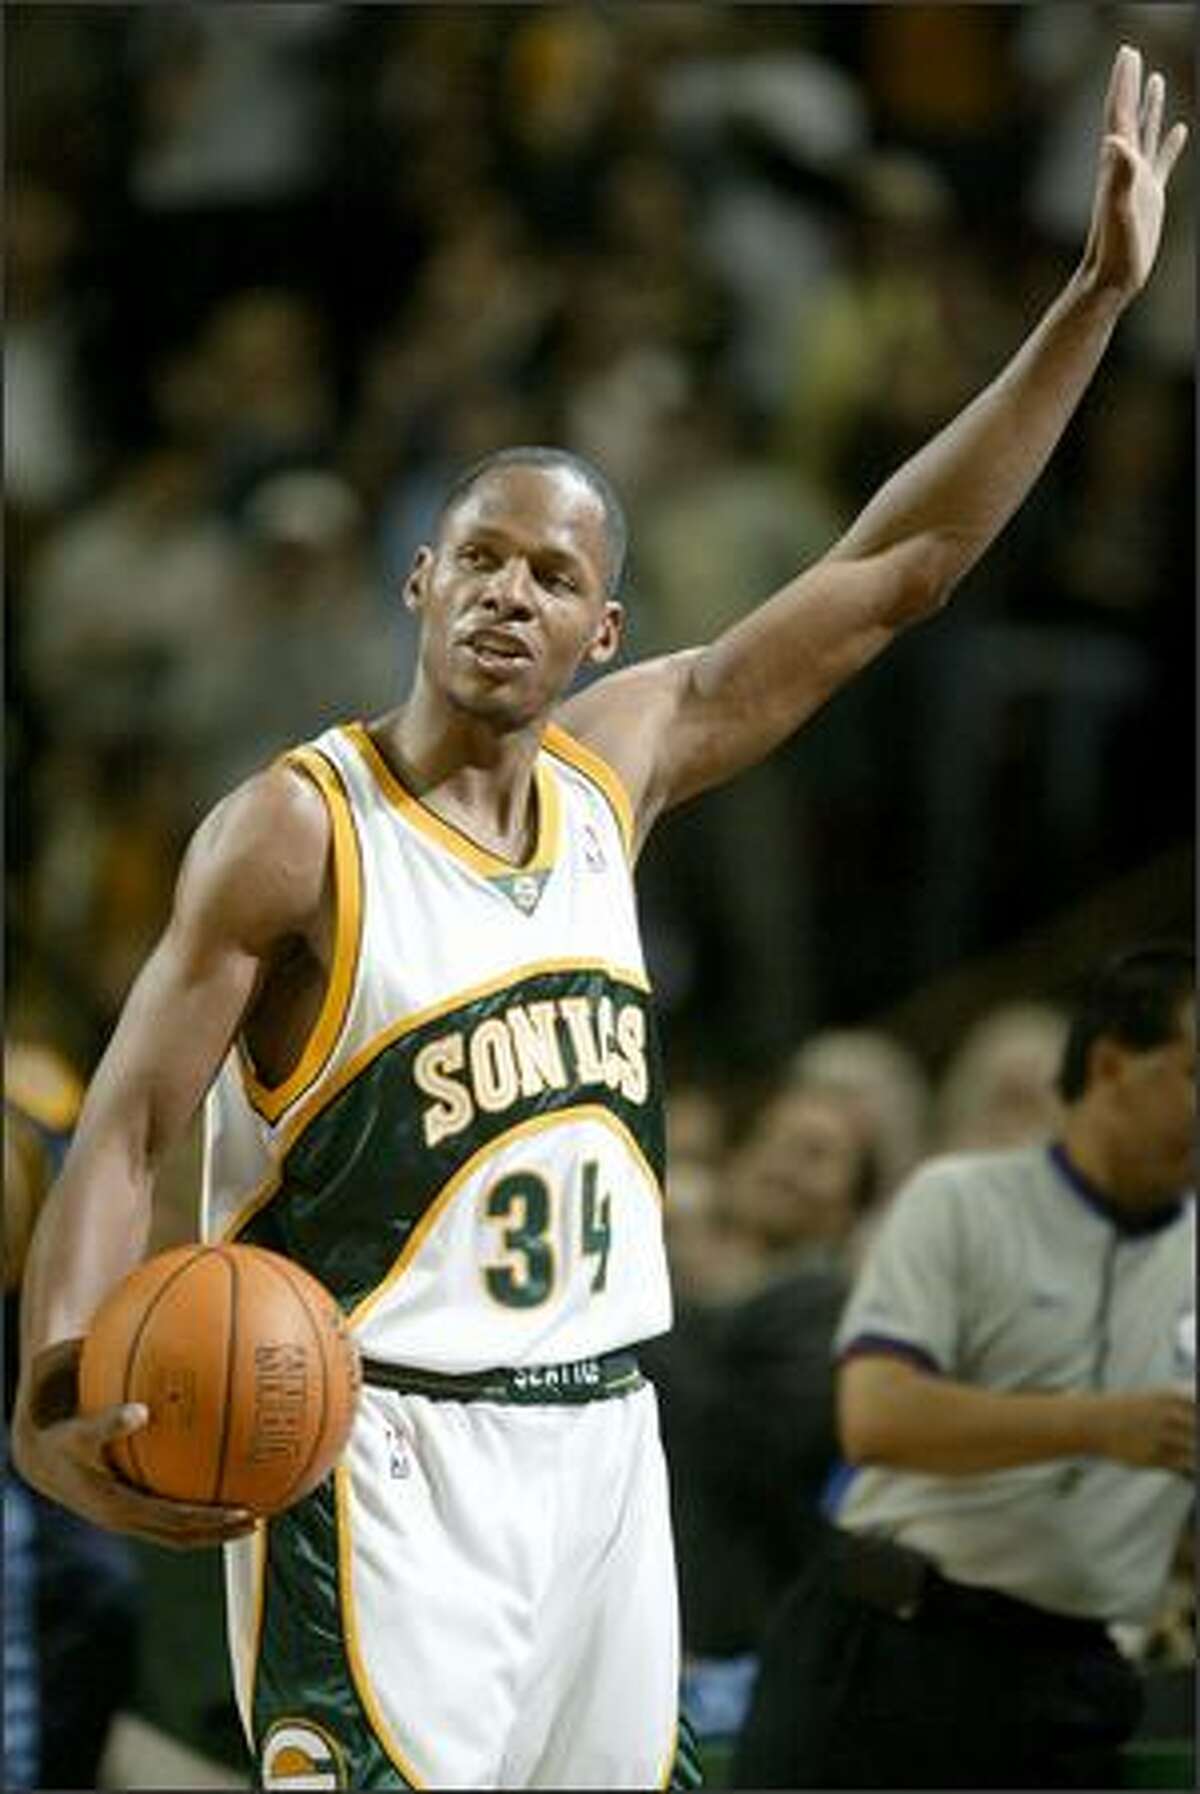 Ray Allen acknowledges the crowd after making his 268th 3-point basket of the season to break the NBA record set by Orlando's Dennis Scott in 1995-96.